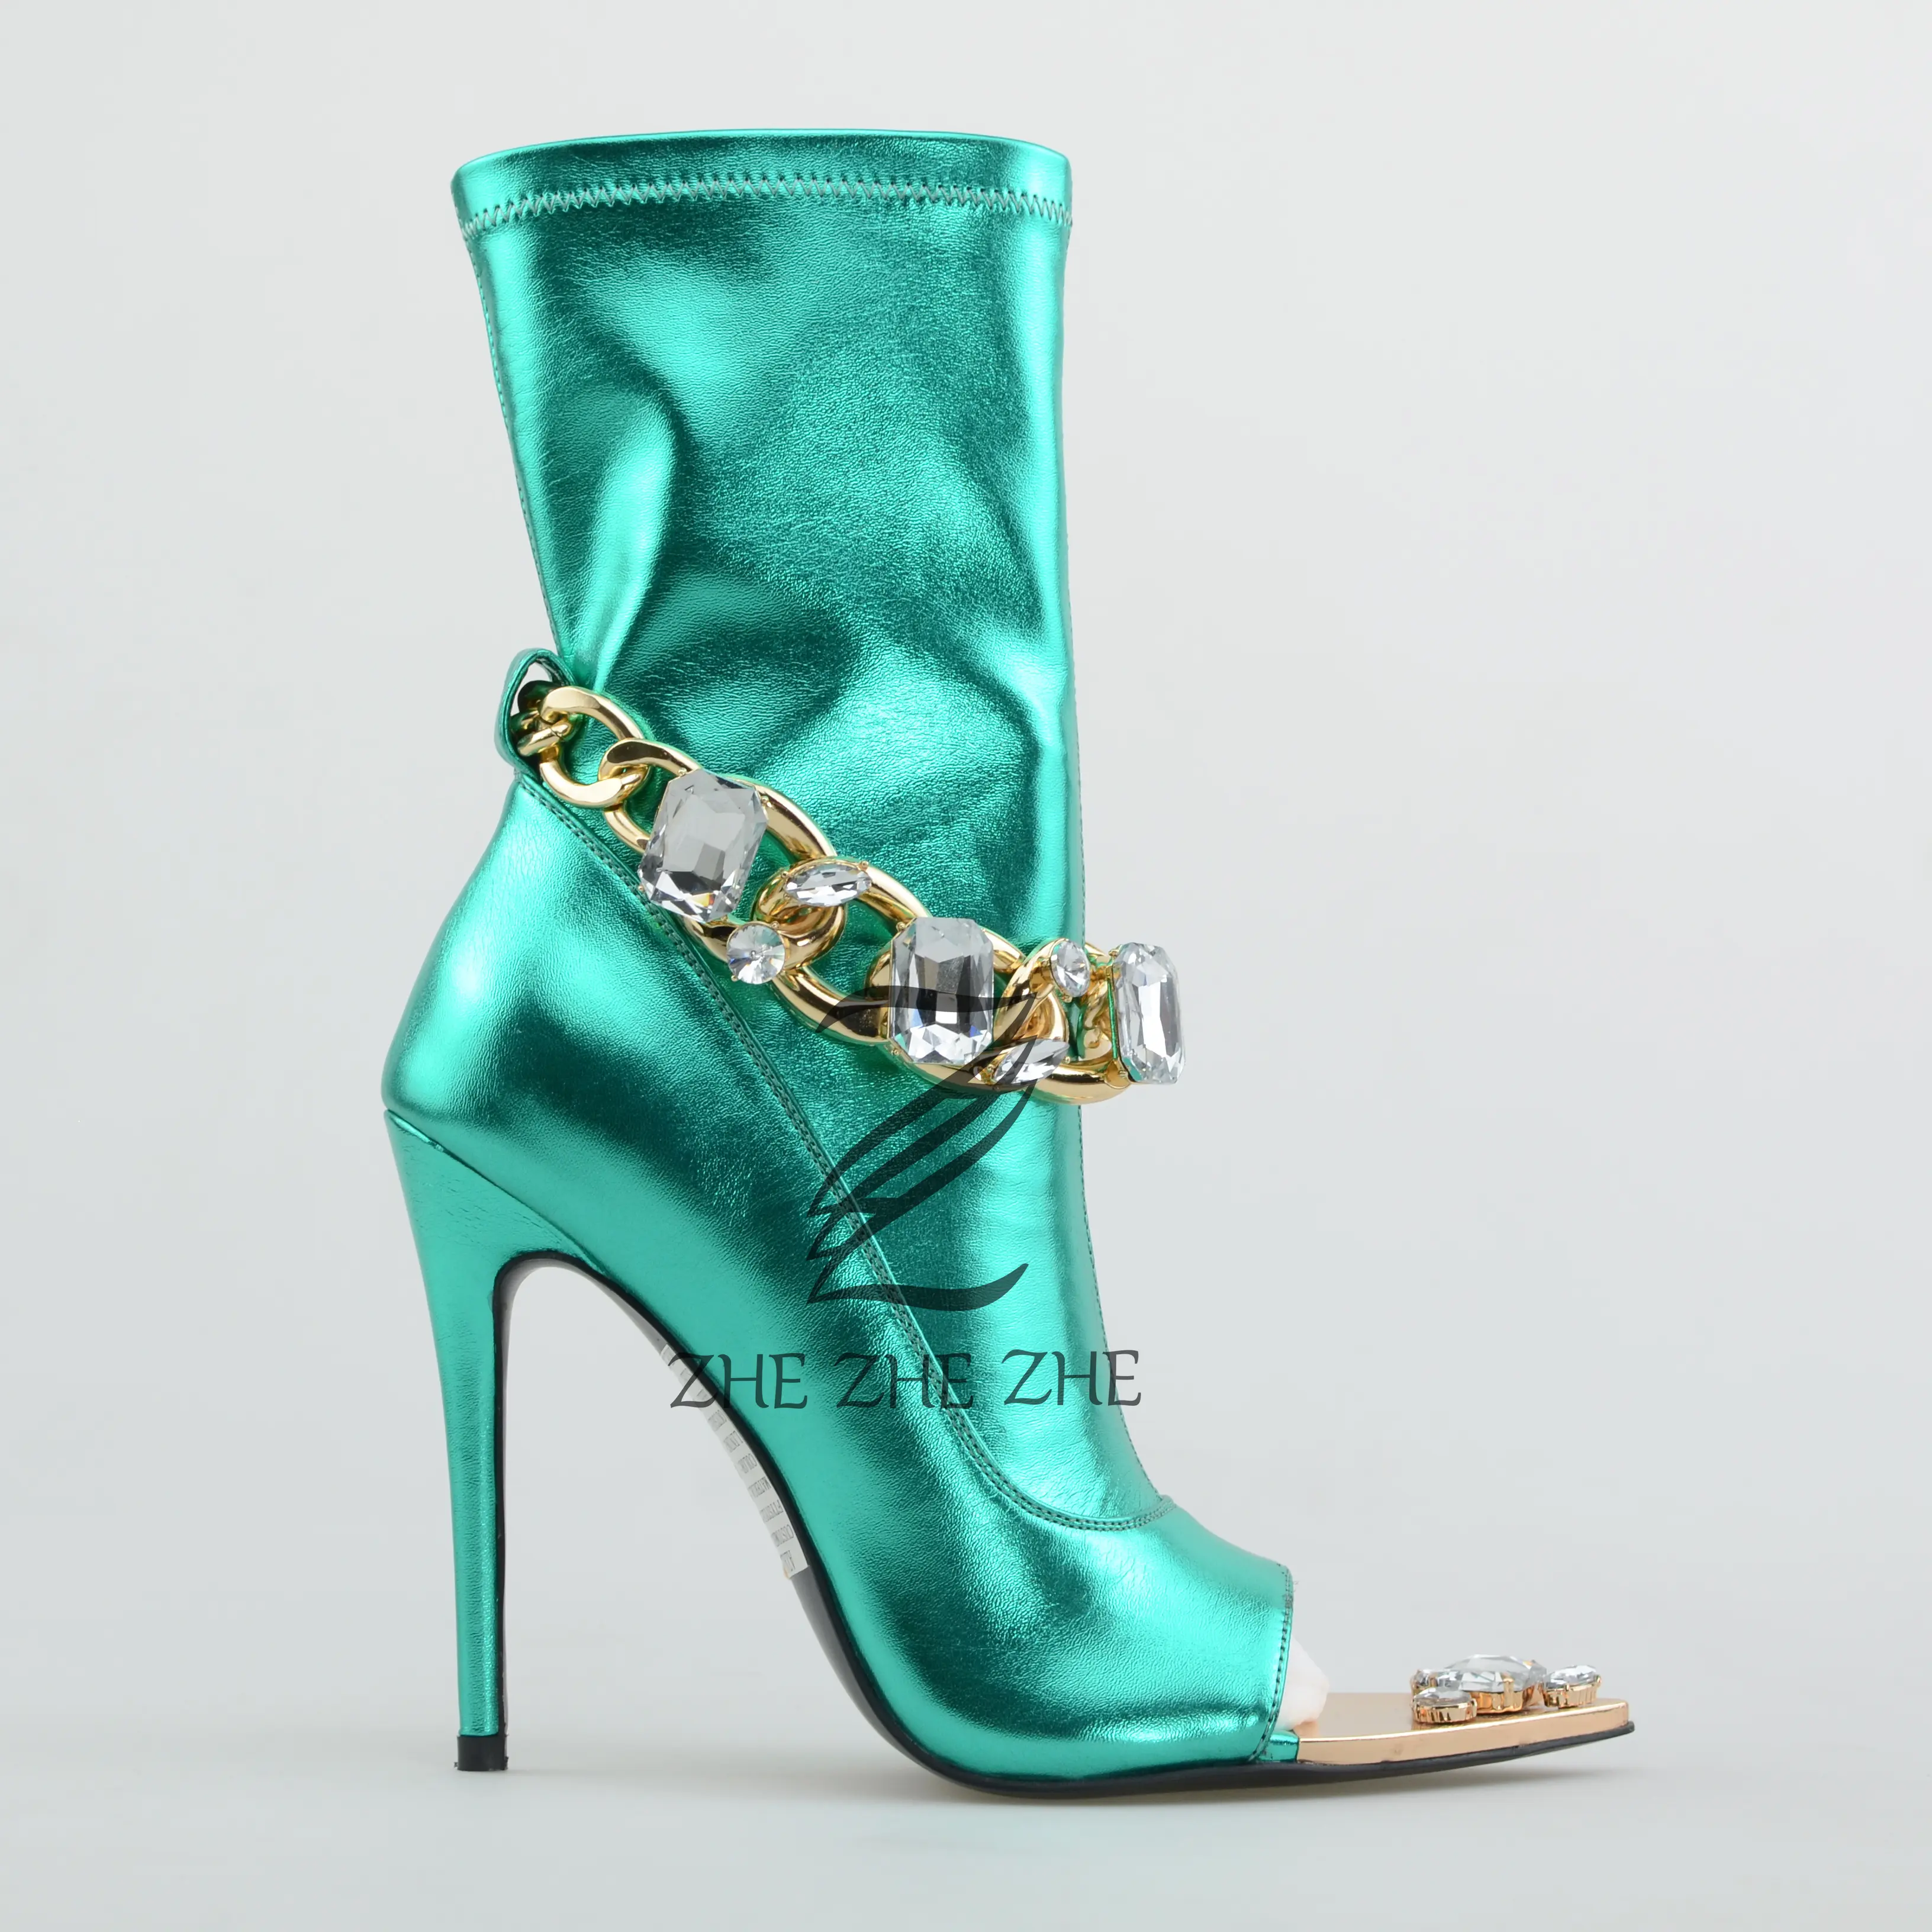 Ladies high heel calf boots with leaky toe gold metallic diamond shoe tip decoration green ankle boots